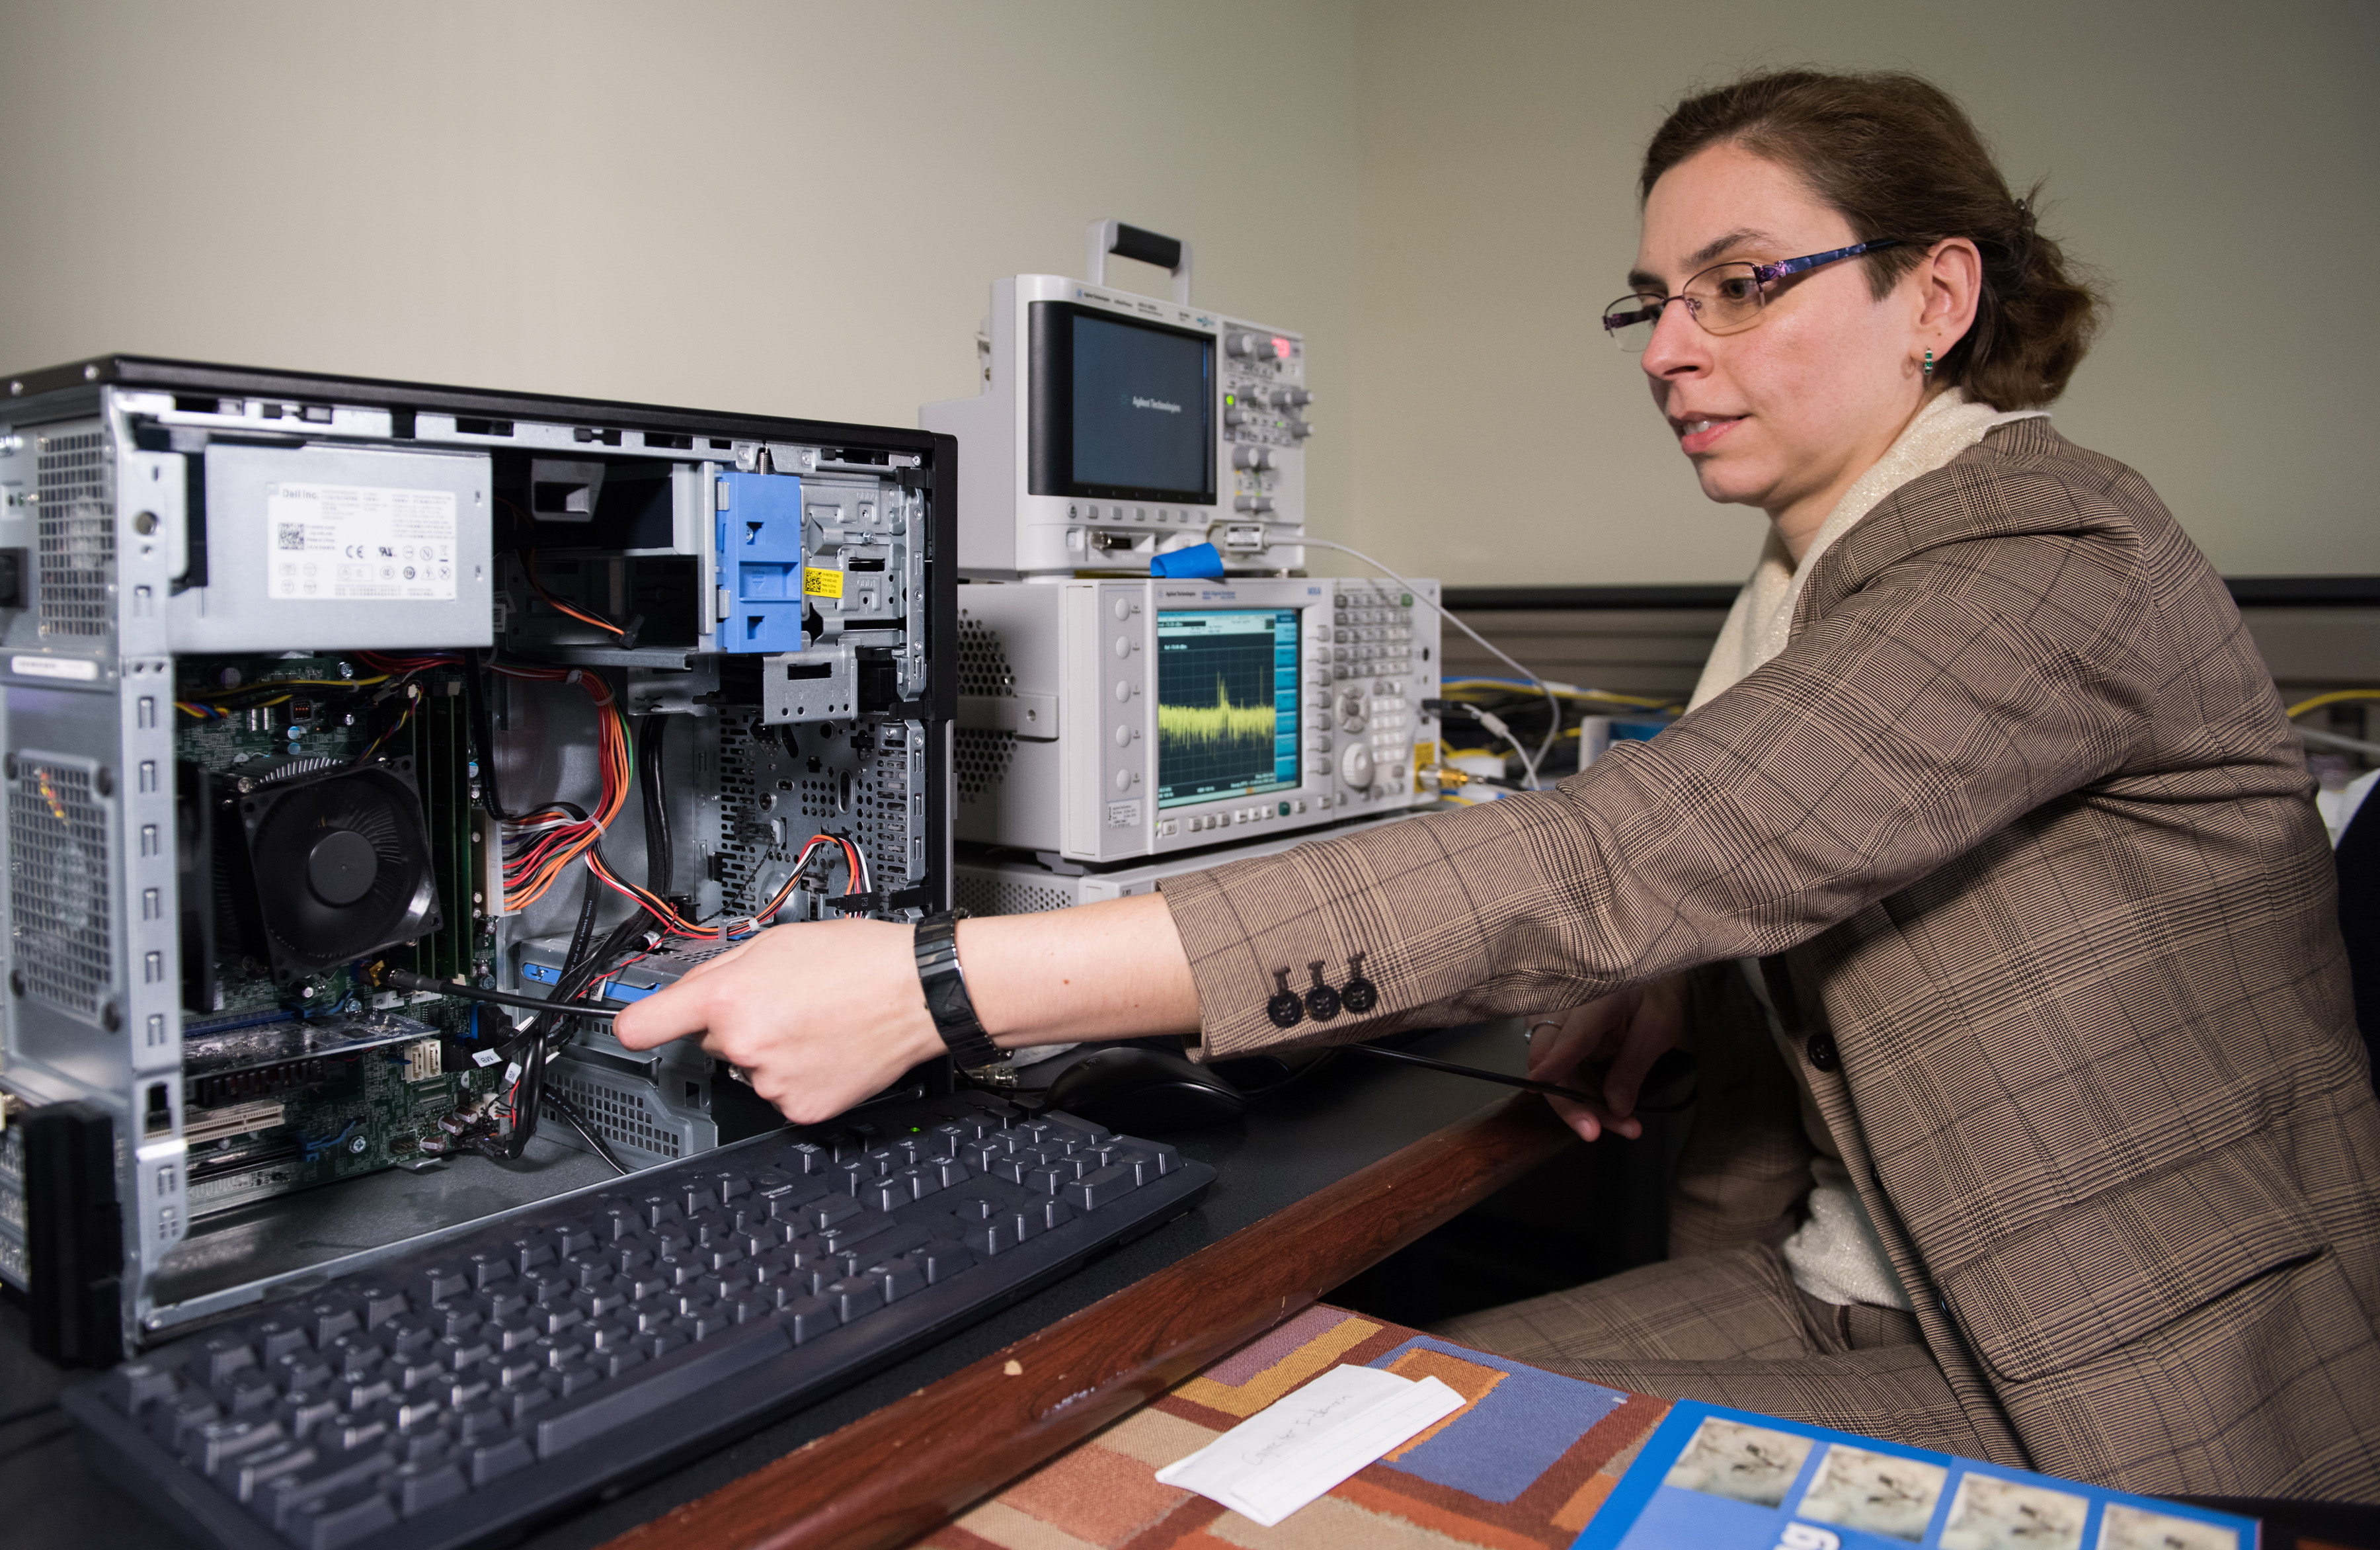 Georgia Tech researcher Alenka Zajic measures electromagnetic emissions from various components of a desktop computer. The researchers have studied emissions from desktop and laptop computers, as well as cellphones. (Credit: Rob Felt)